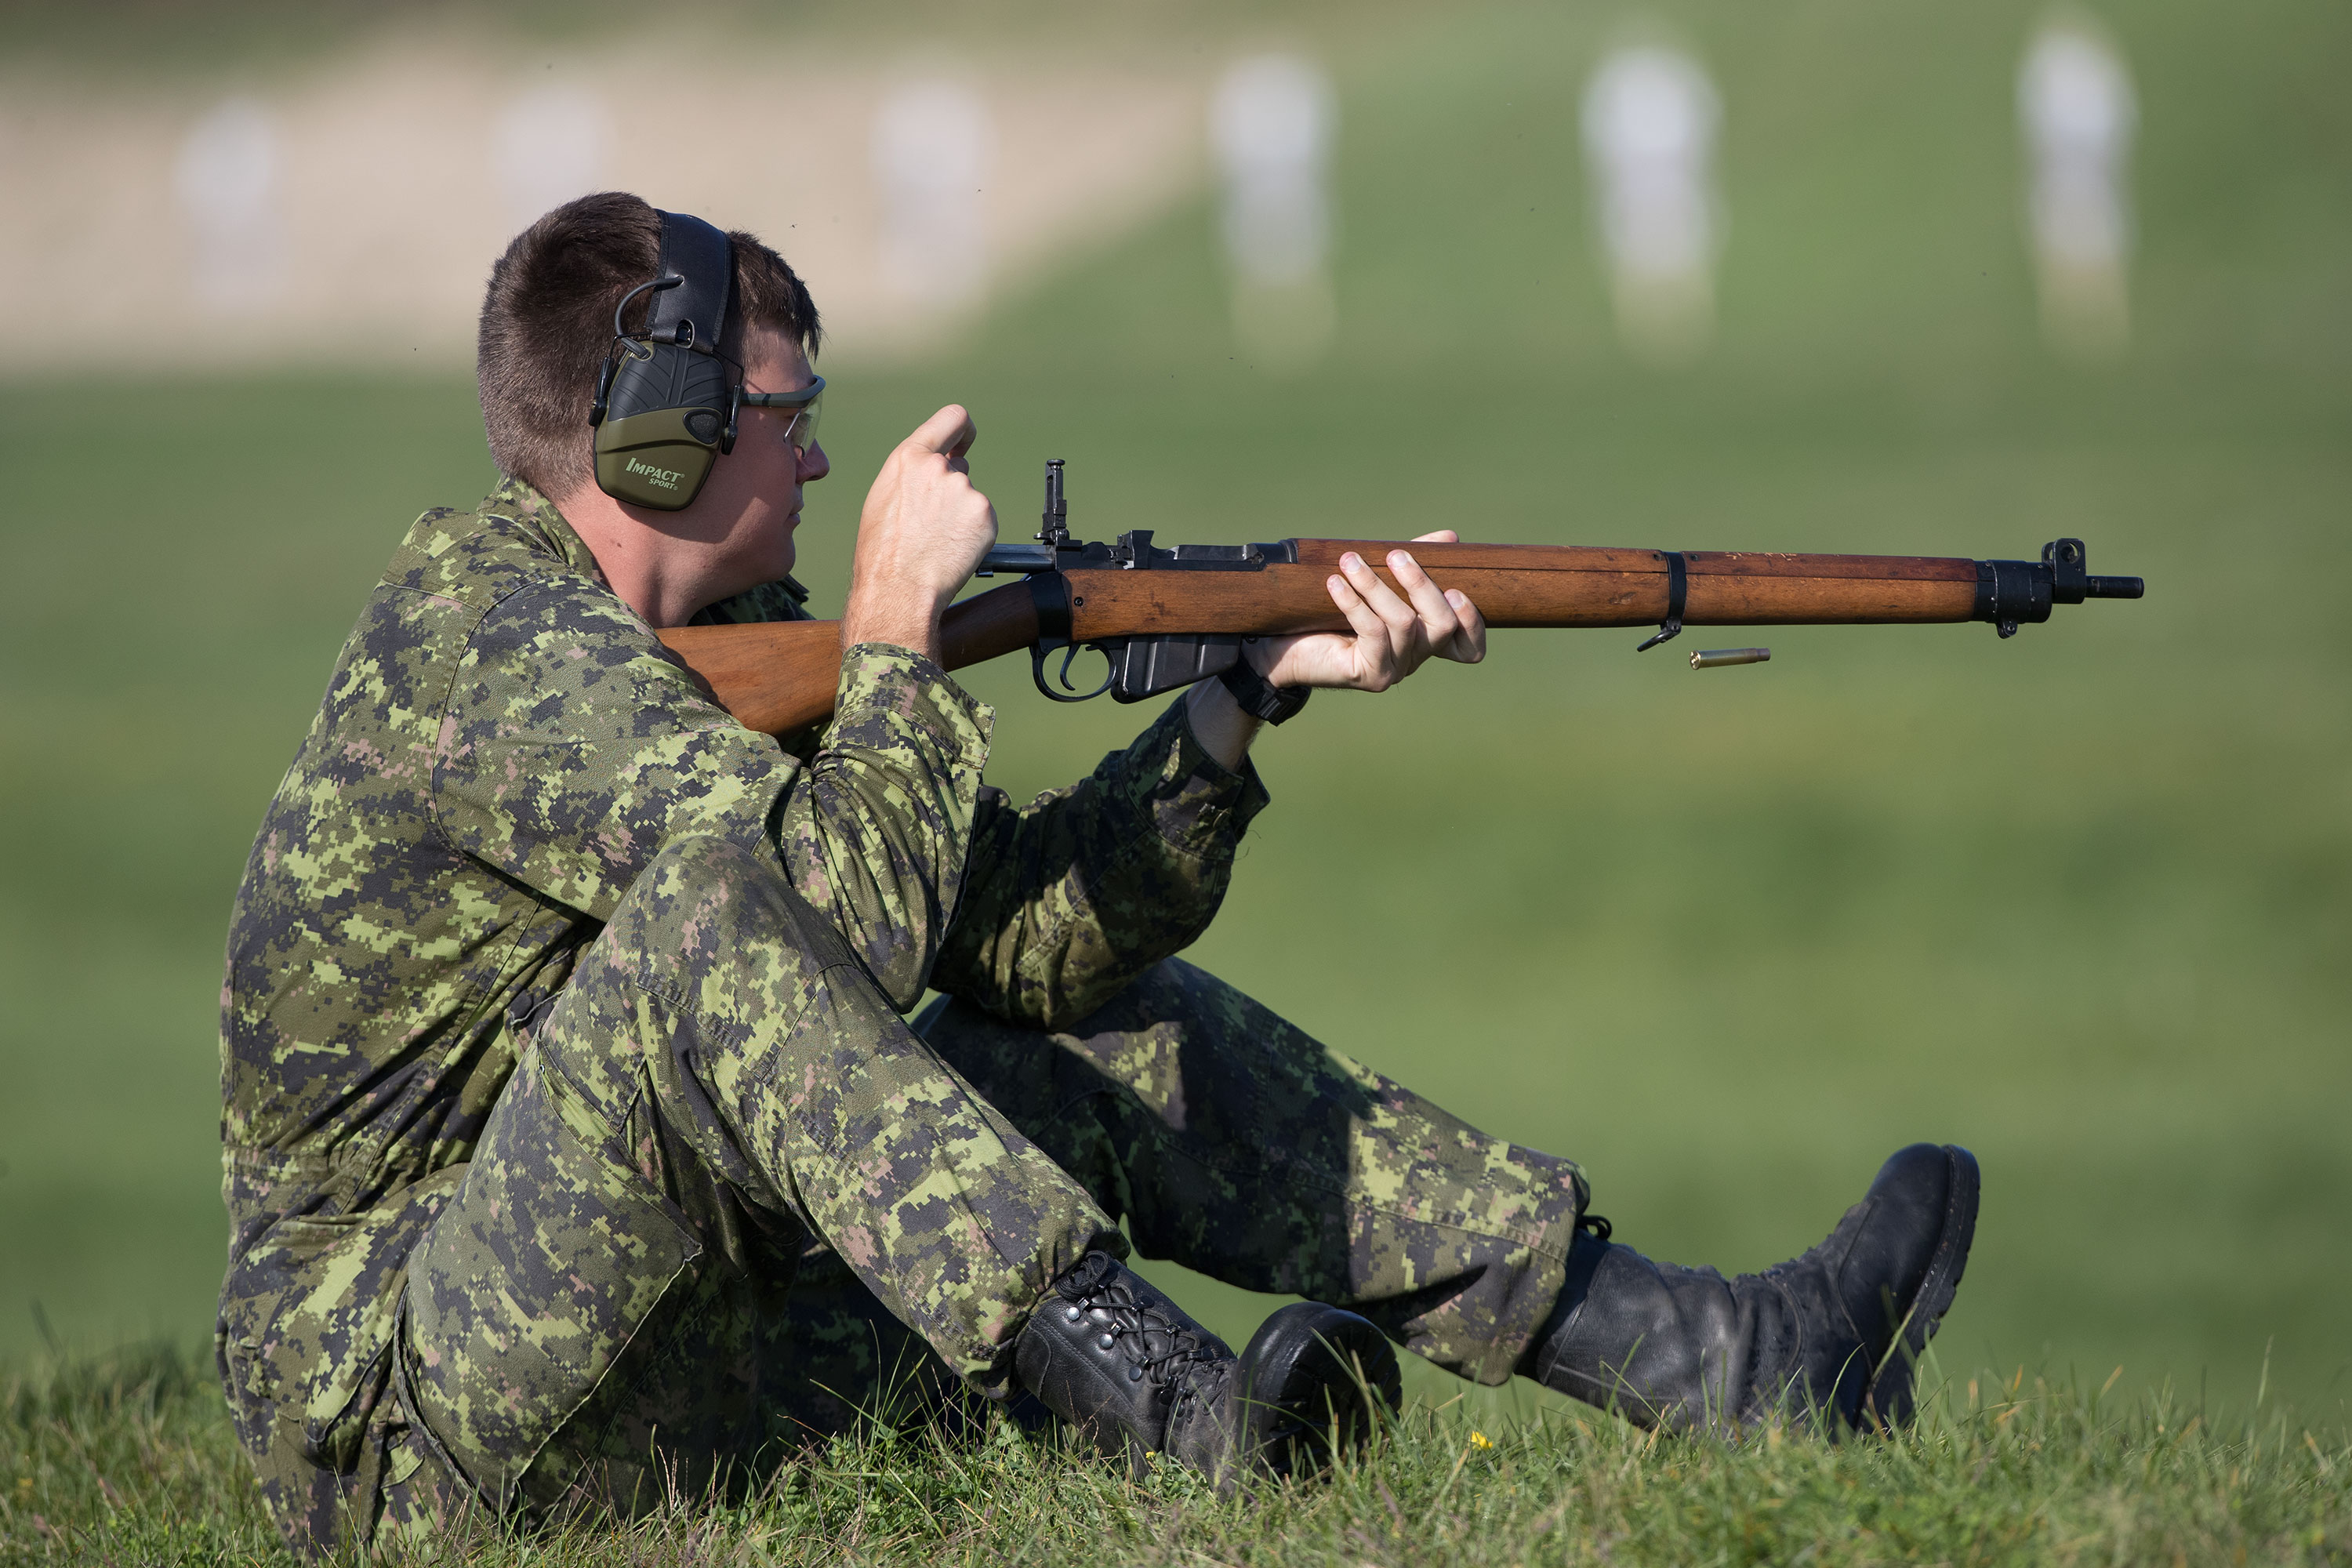 303 Lee-Enfield rifle a Canadian hunting tradition - Ontario OUT of DOORS